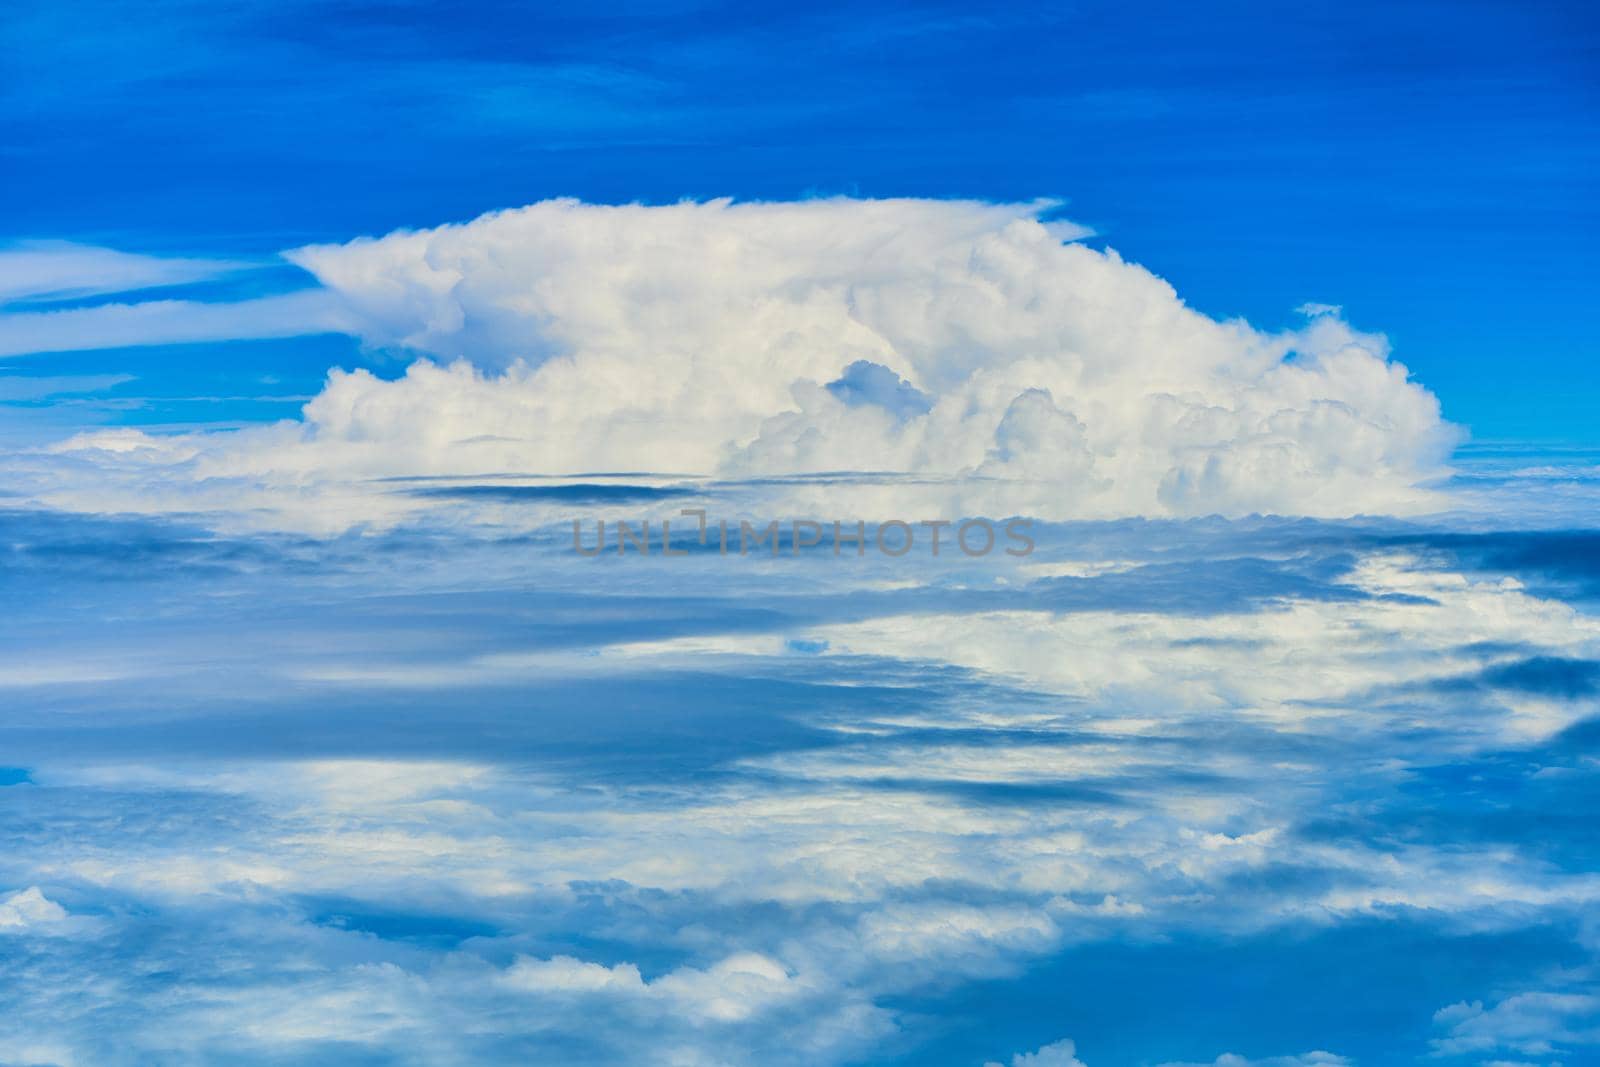 Landscape of fluffy white clouds on a dark blue sky. View from the plane at high altitude.